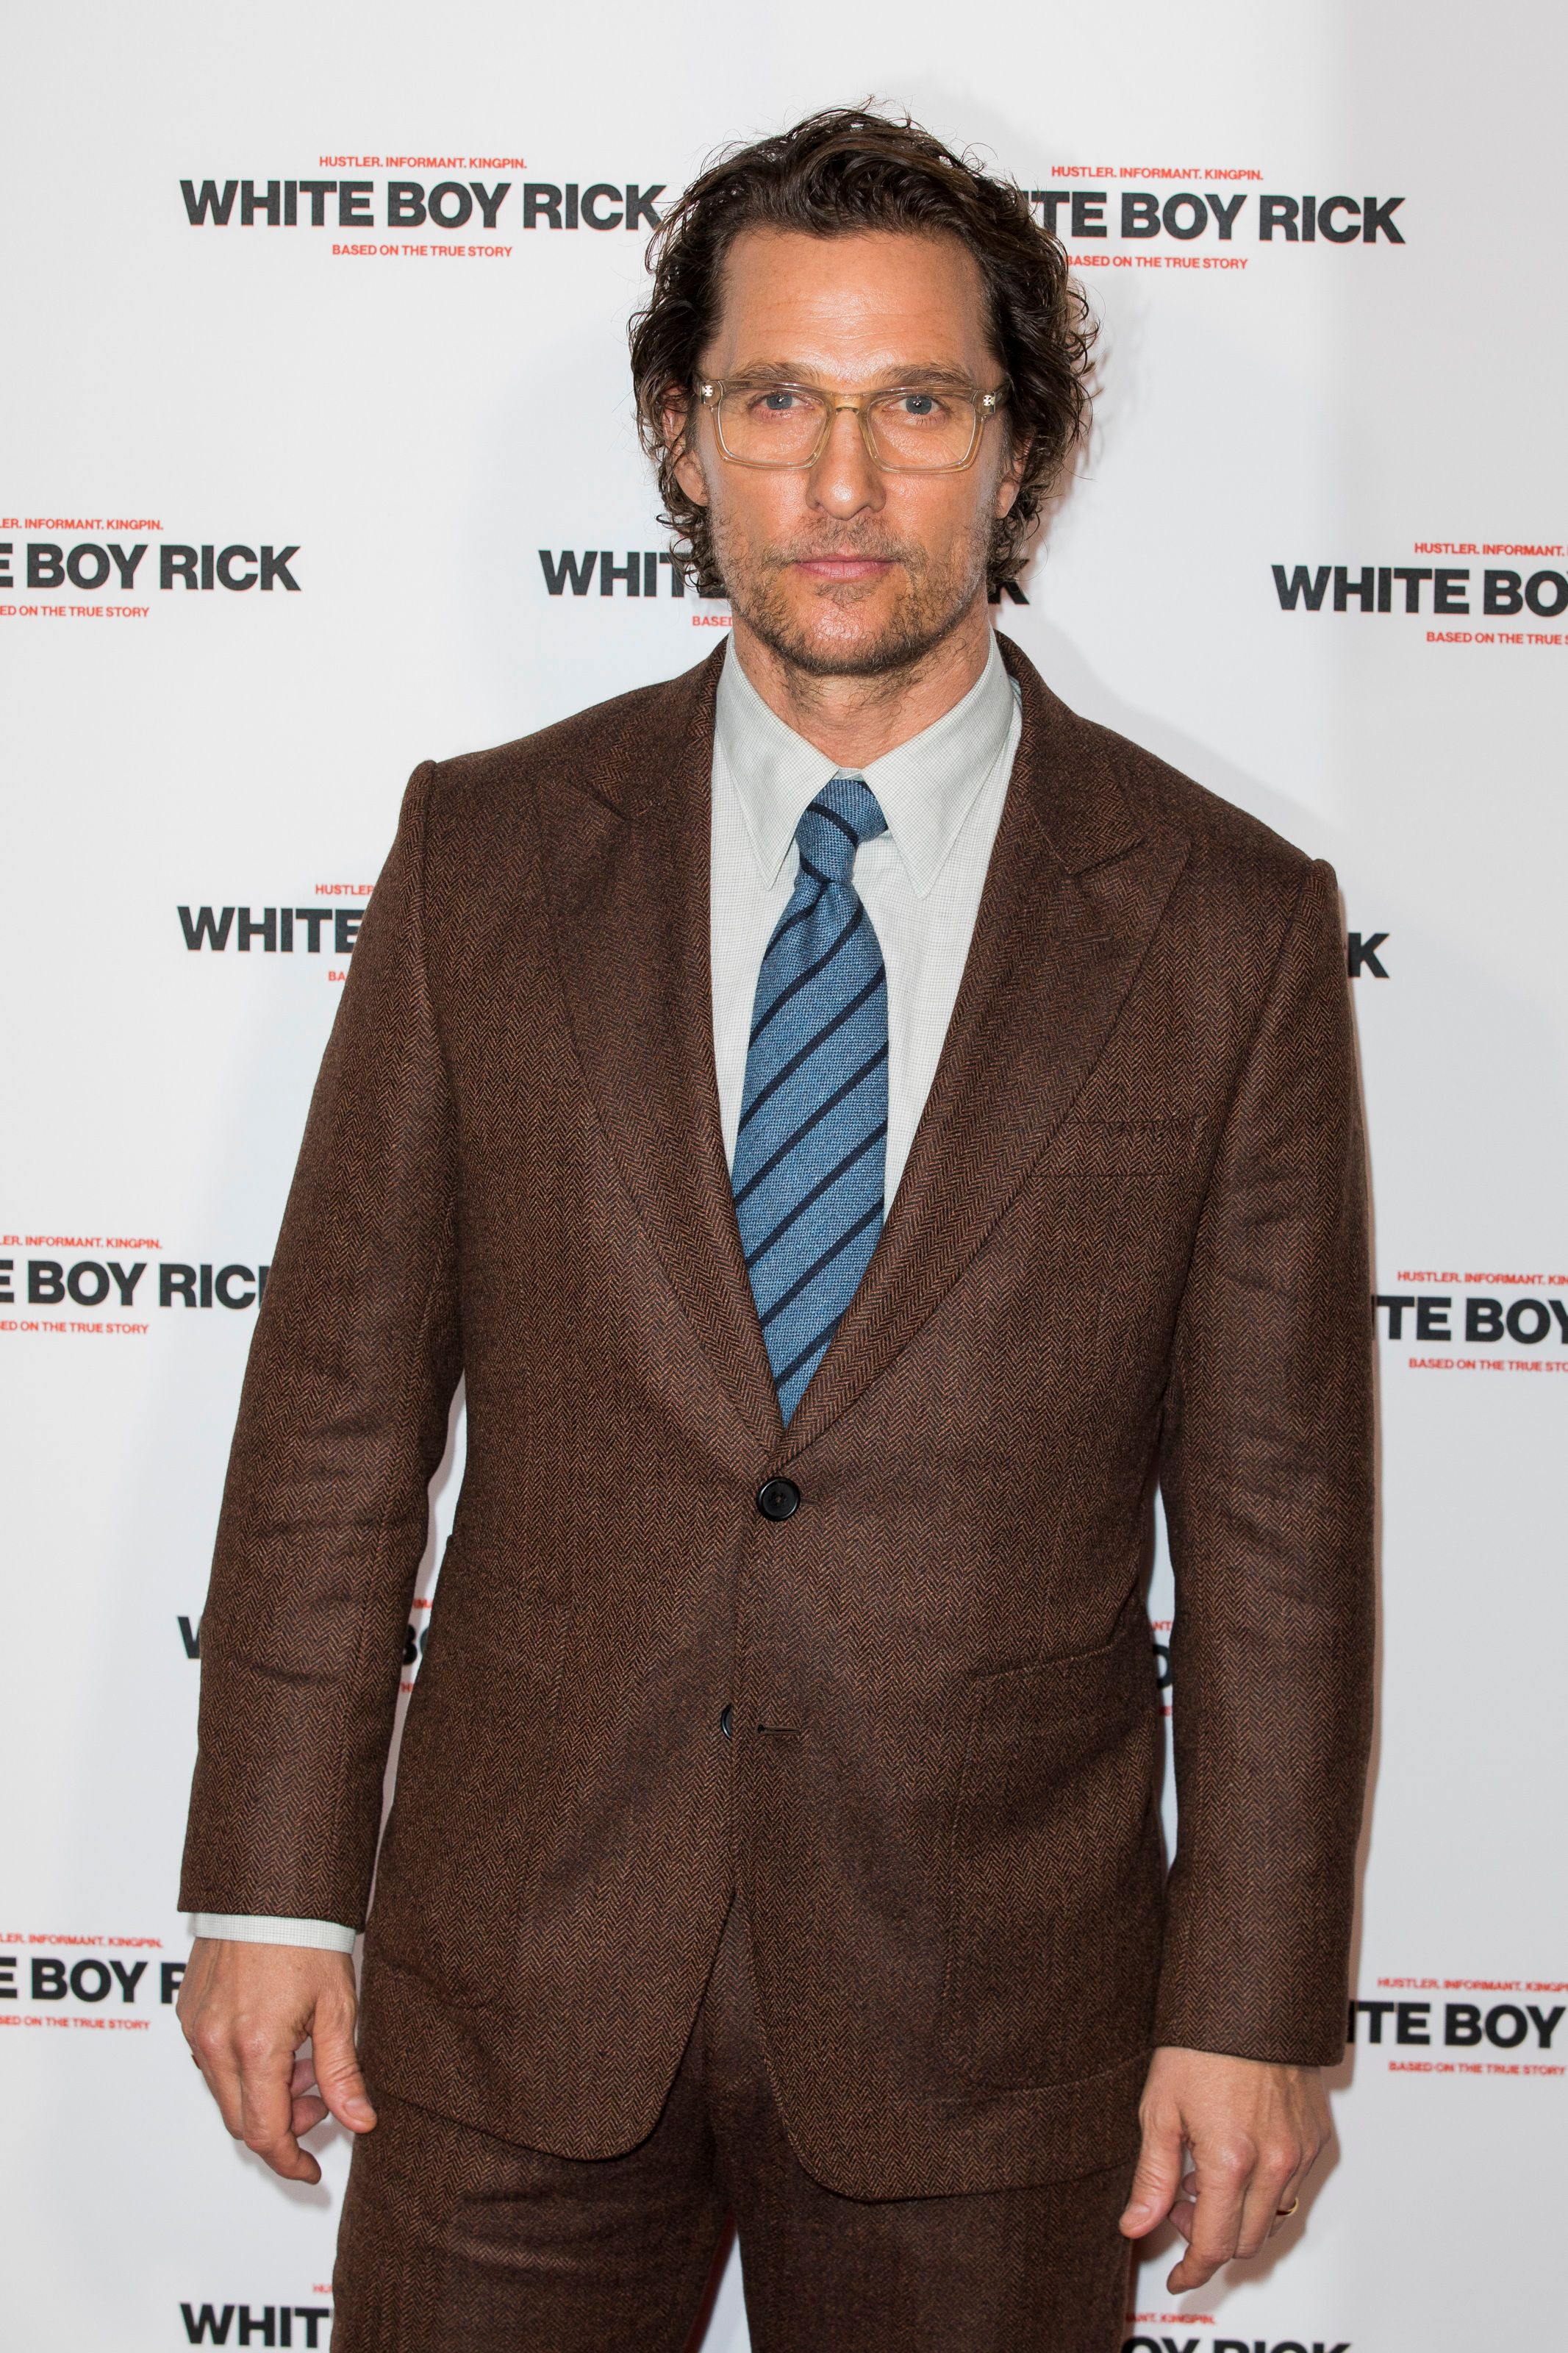 Matthew McConaughey attends a special screening of "White Boy Rick" at Picturehouse Central on November 27, 2018 in London, England. | Source: Getty Images